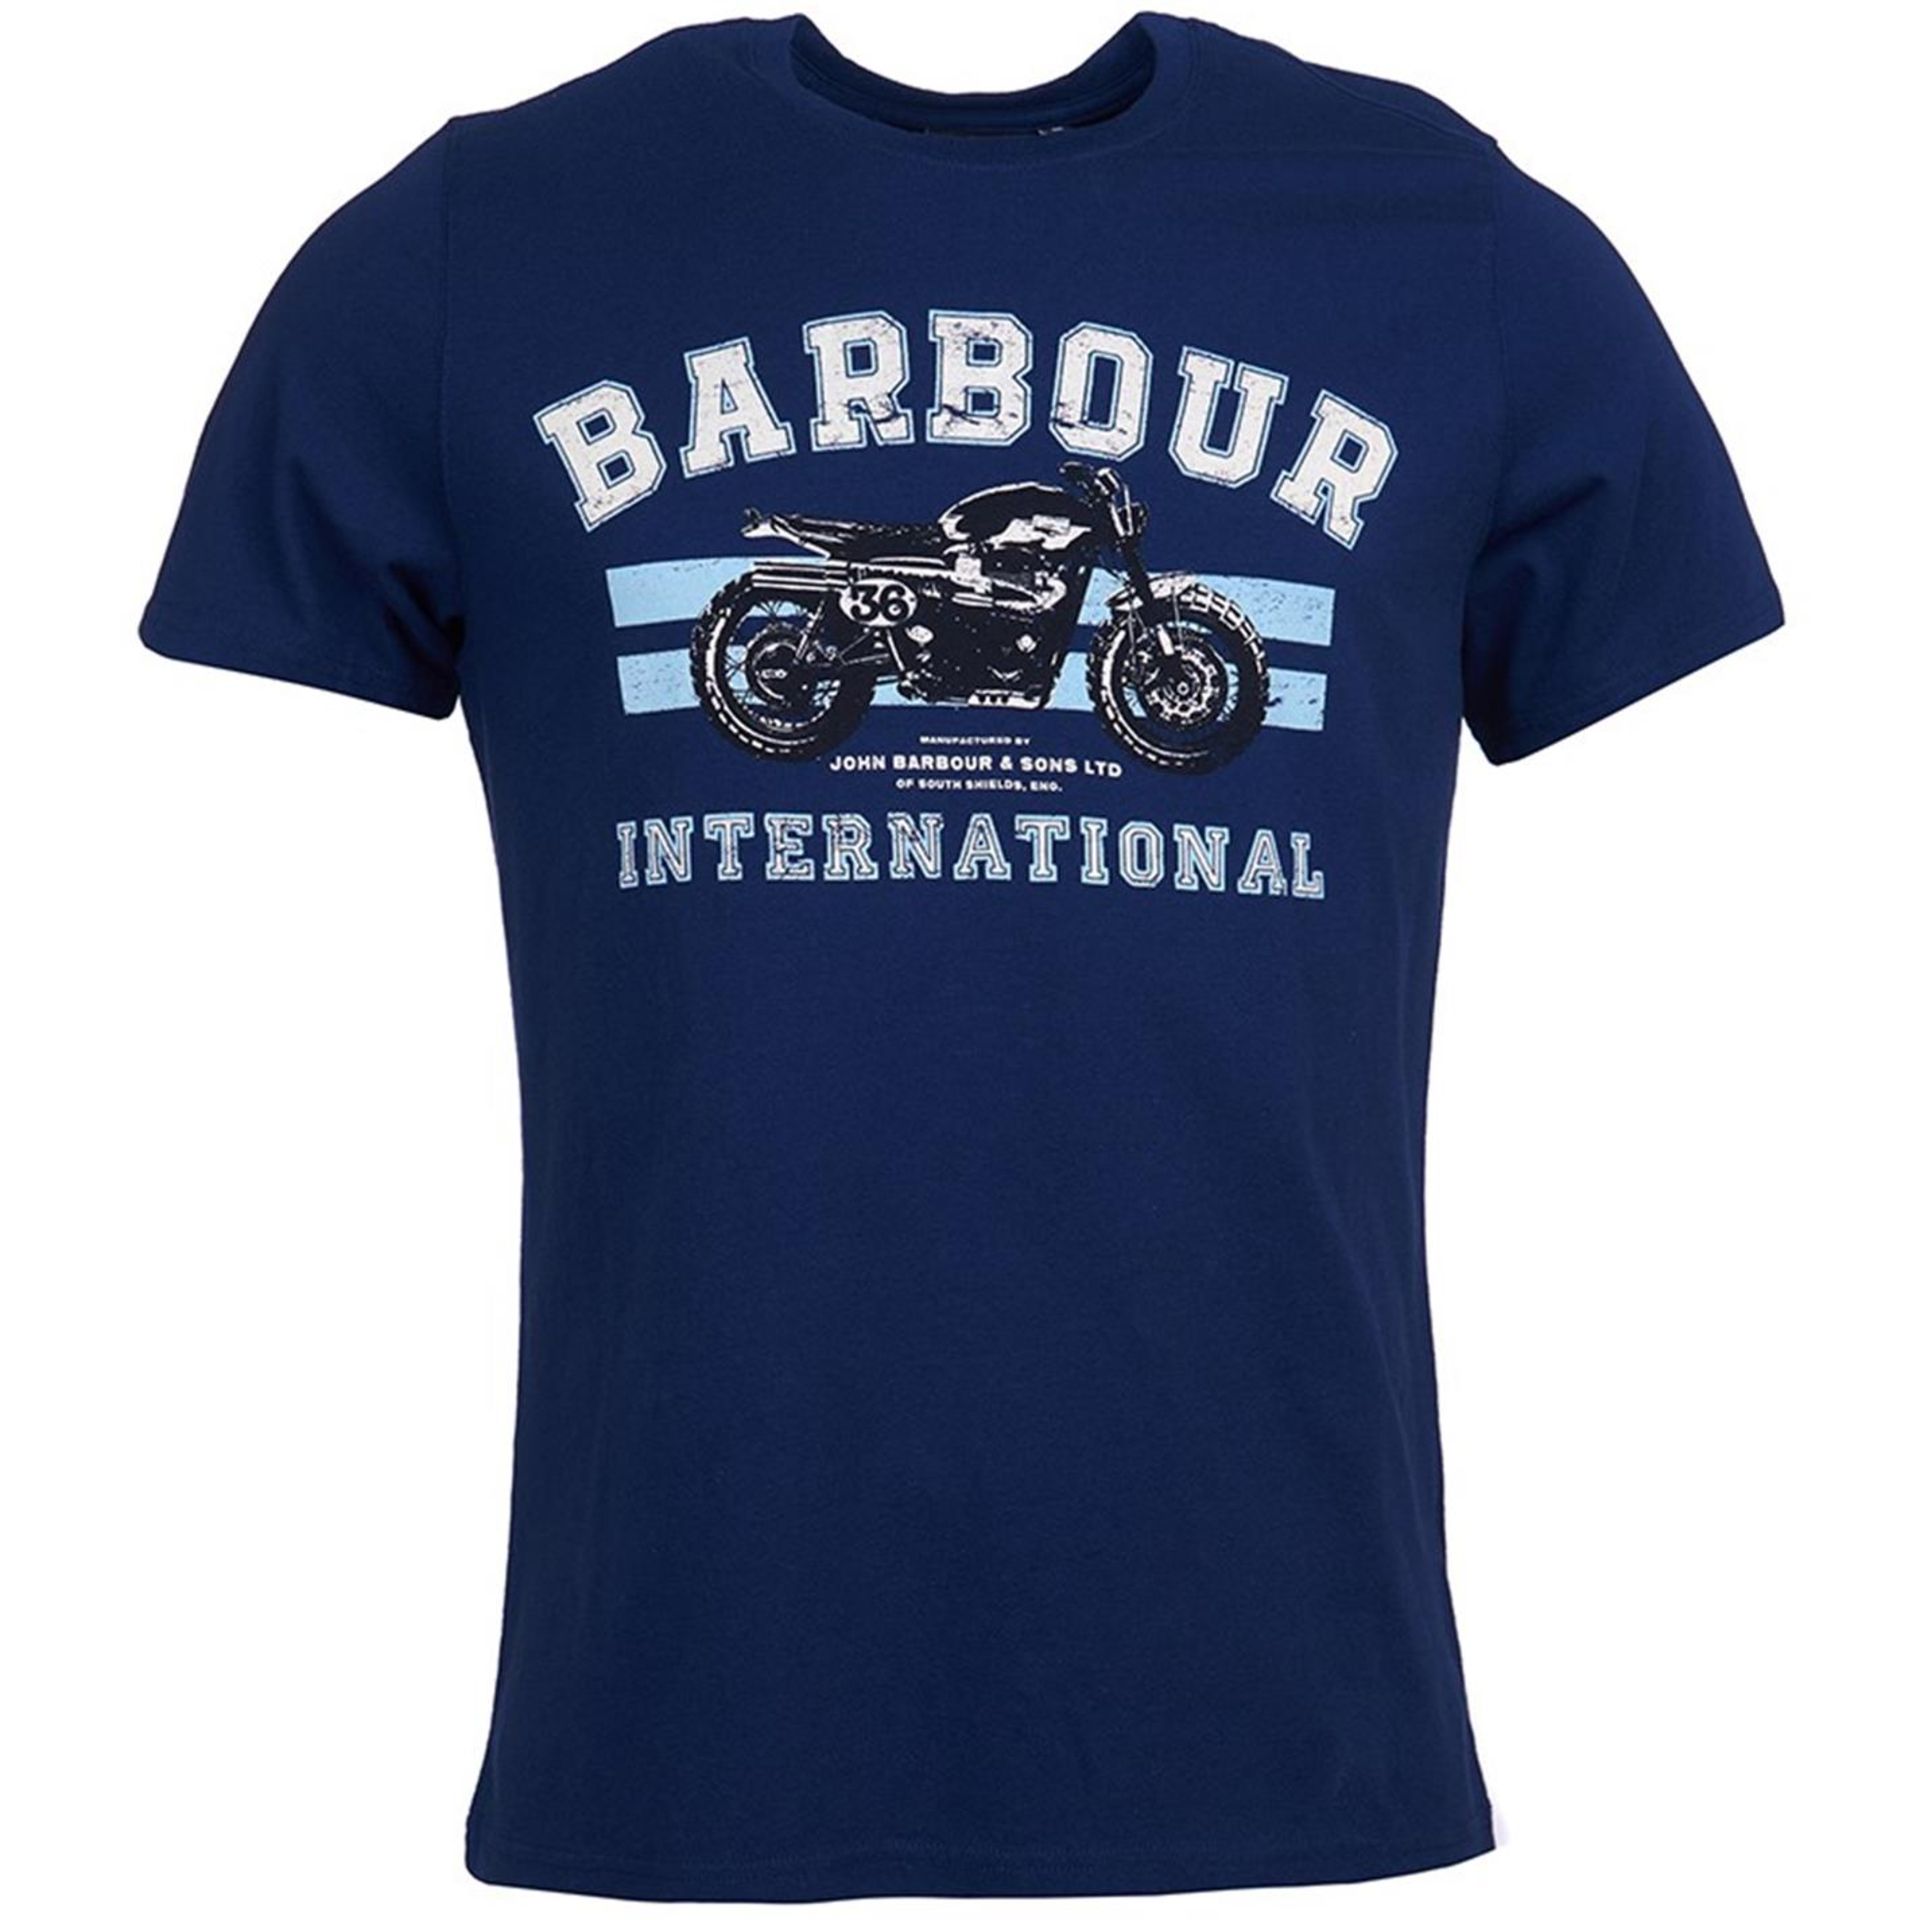 BRAND NEW BARBOUR BRACKET T SHIRT REGAL BLUE SIZE SMALL RRP £40 -1